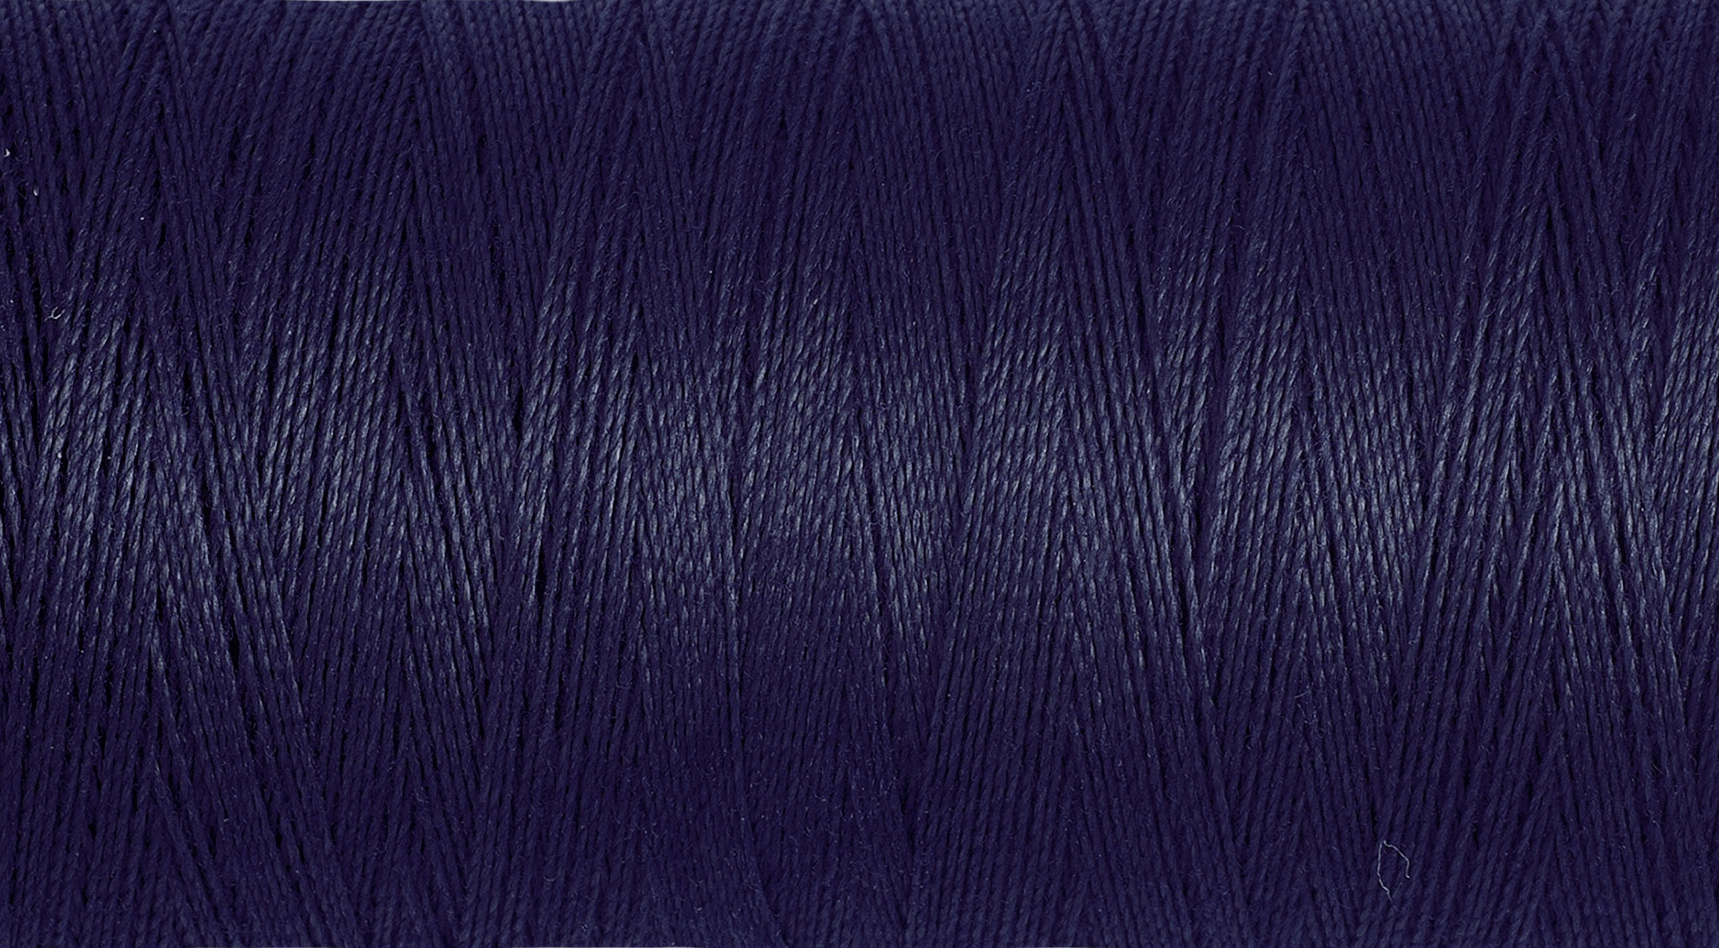 Gütermann Sew-All Polyester Sewing Thread - Colour: #339 Dark Navy —   - Sewing Supplies